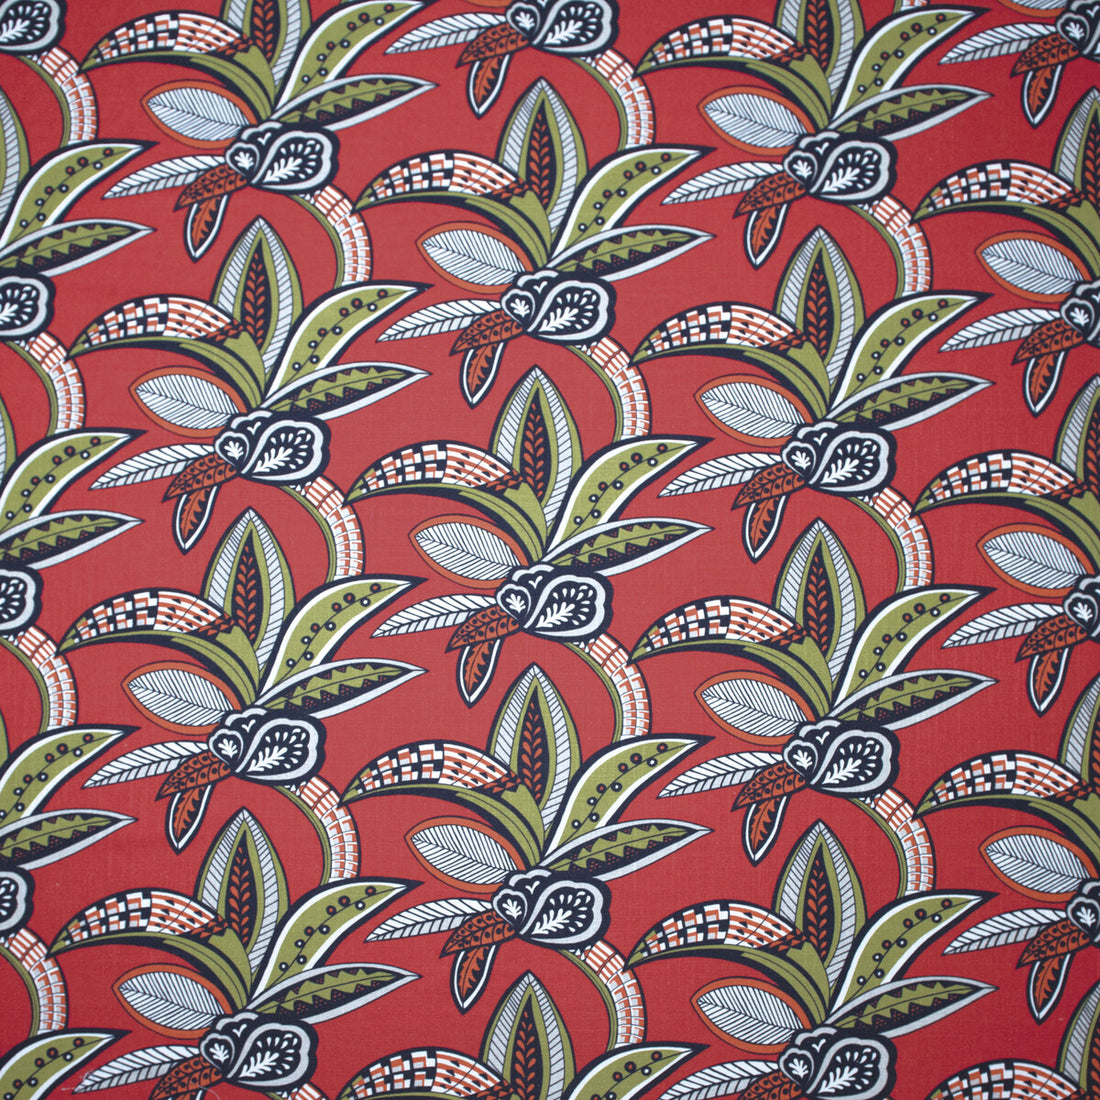 Tanzania fabric in coral color - pattern GDT5426.1.0 - by Gaston y Daniela in the Gaston Africalia collection